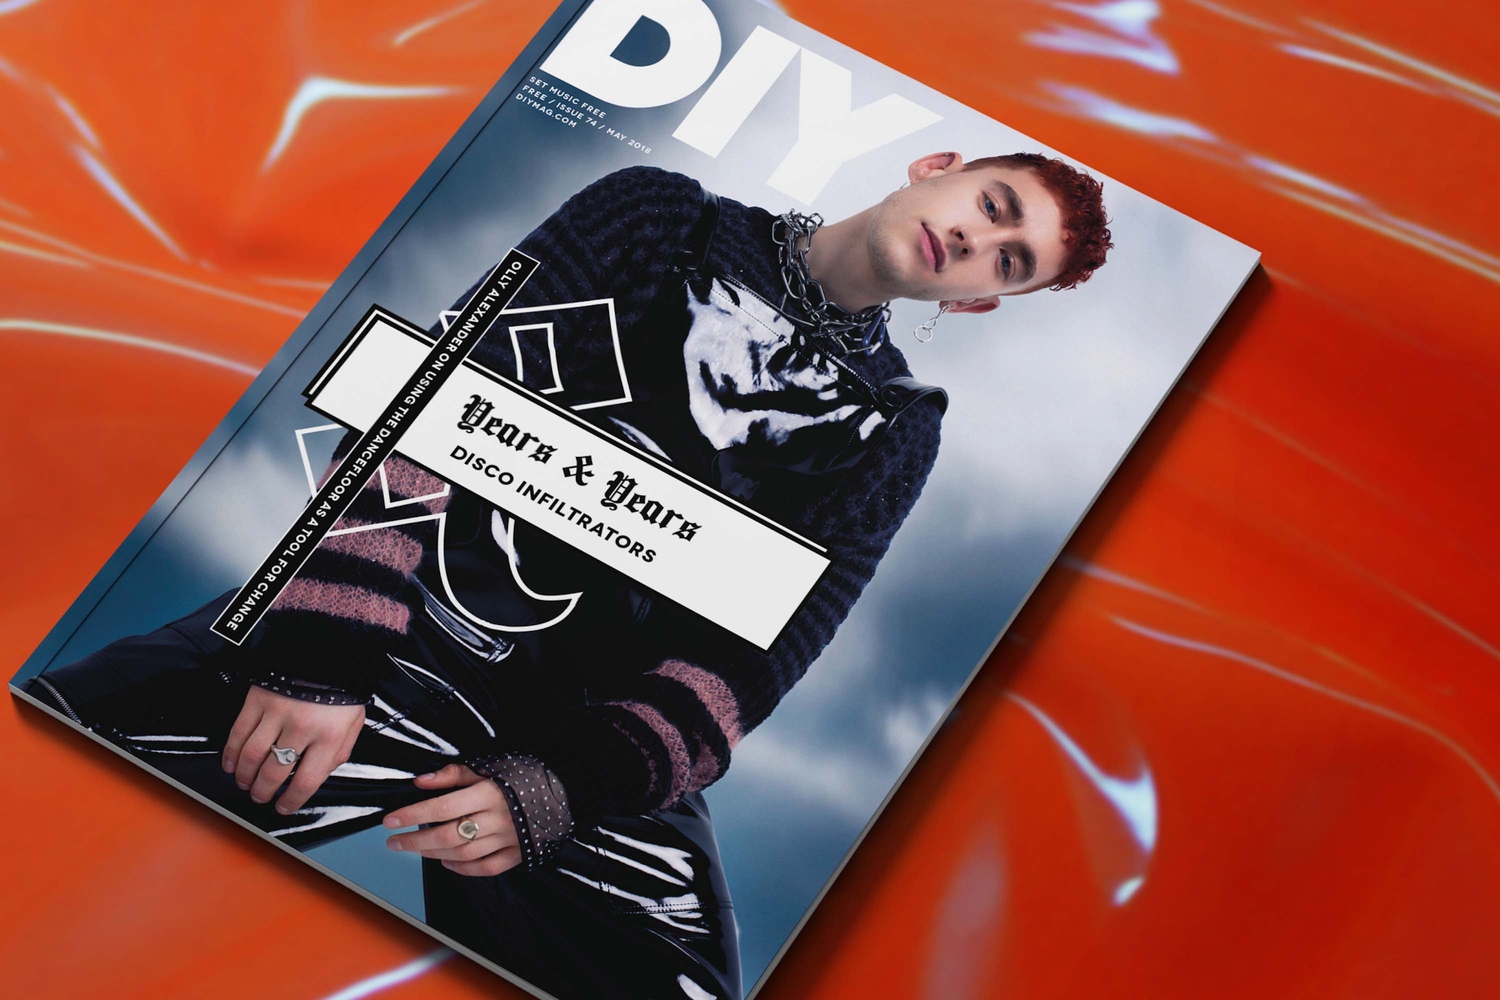 Years & Years front the May issue of DIY!